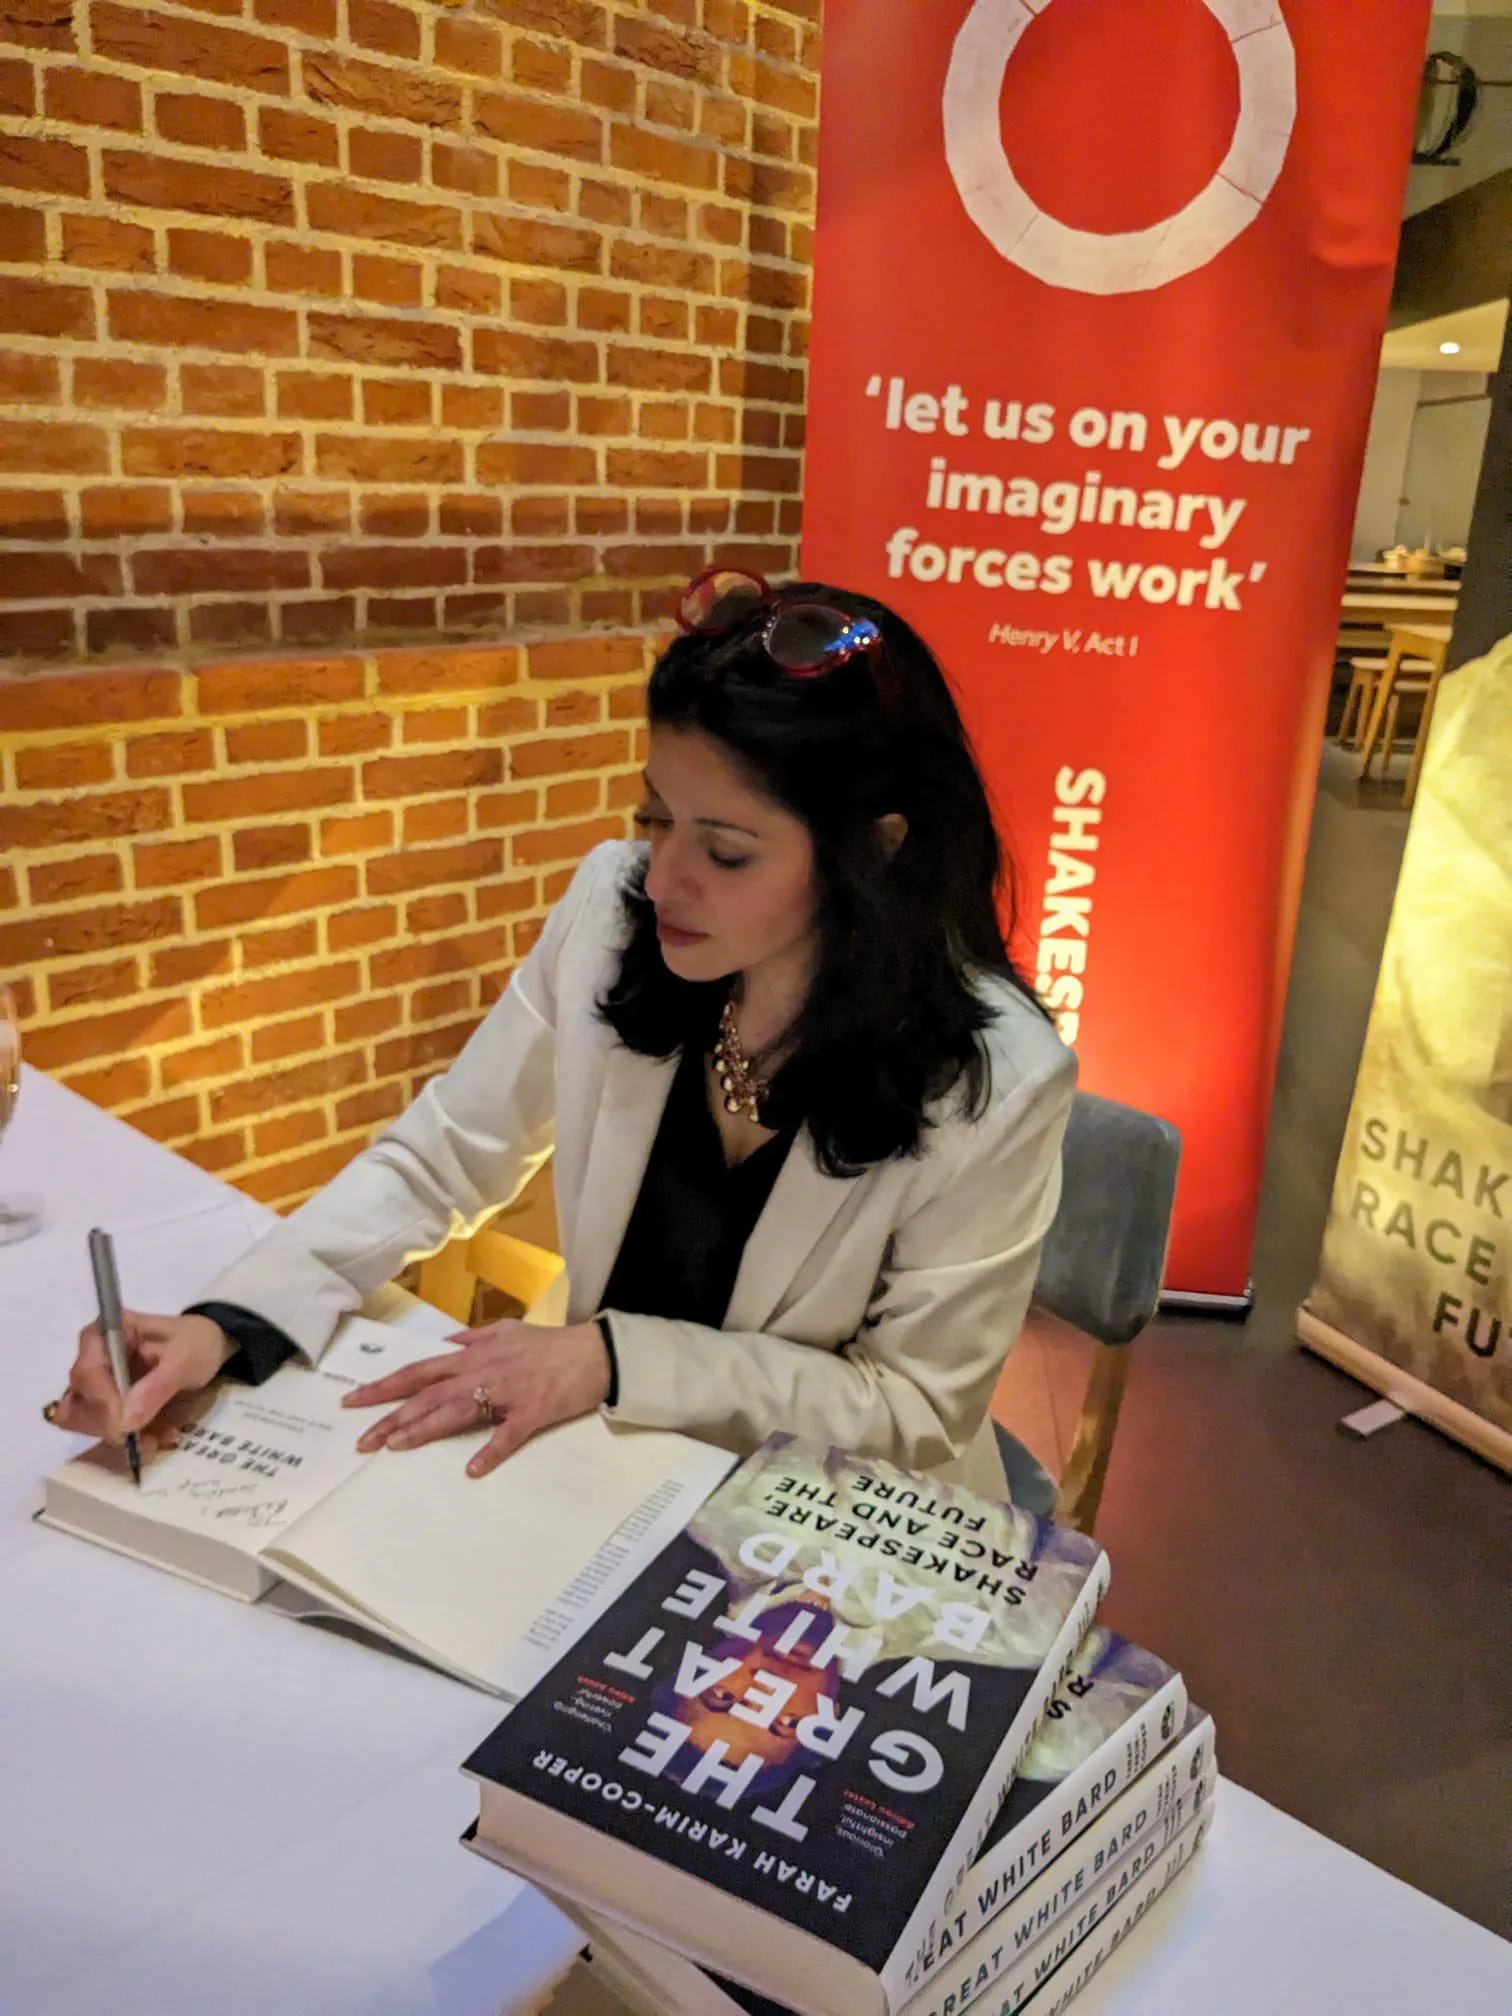 The photo shows Professor Farah Karim-Cooper signing the first copies of The Great White Bard